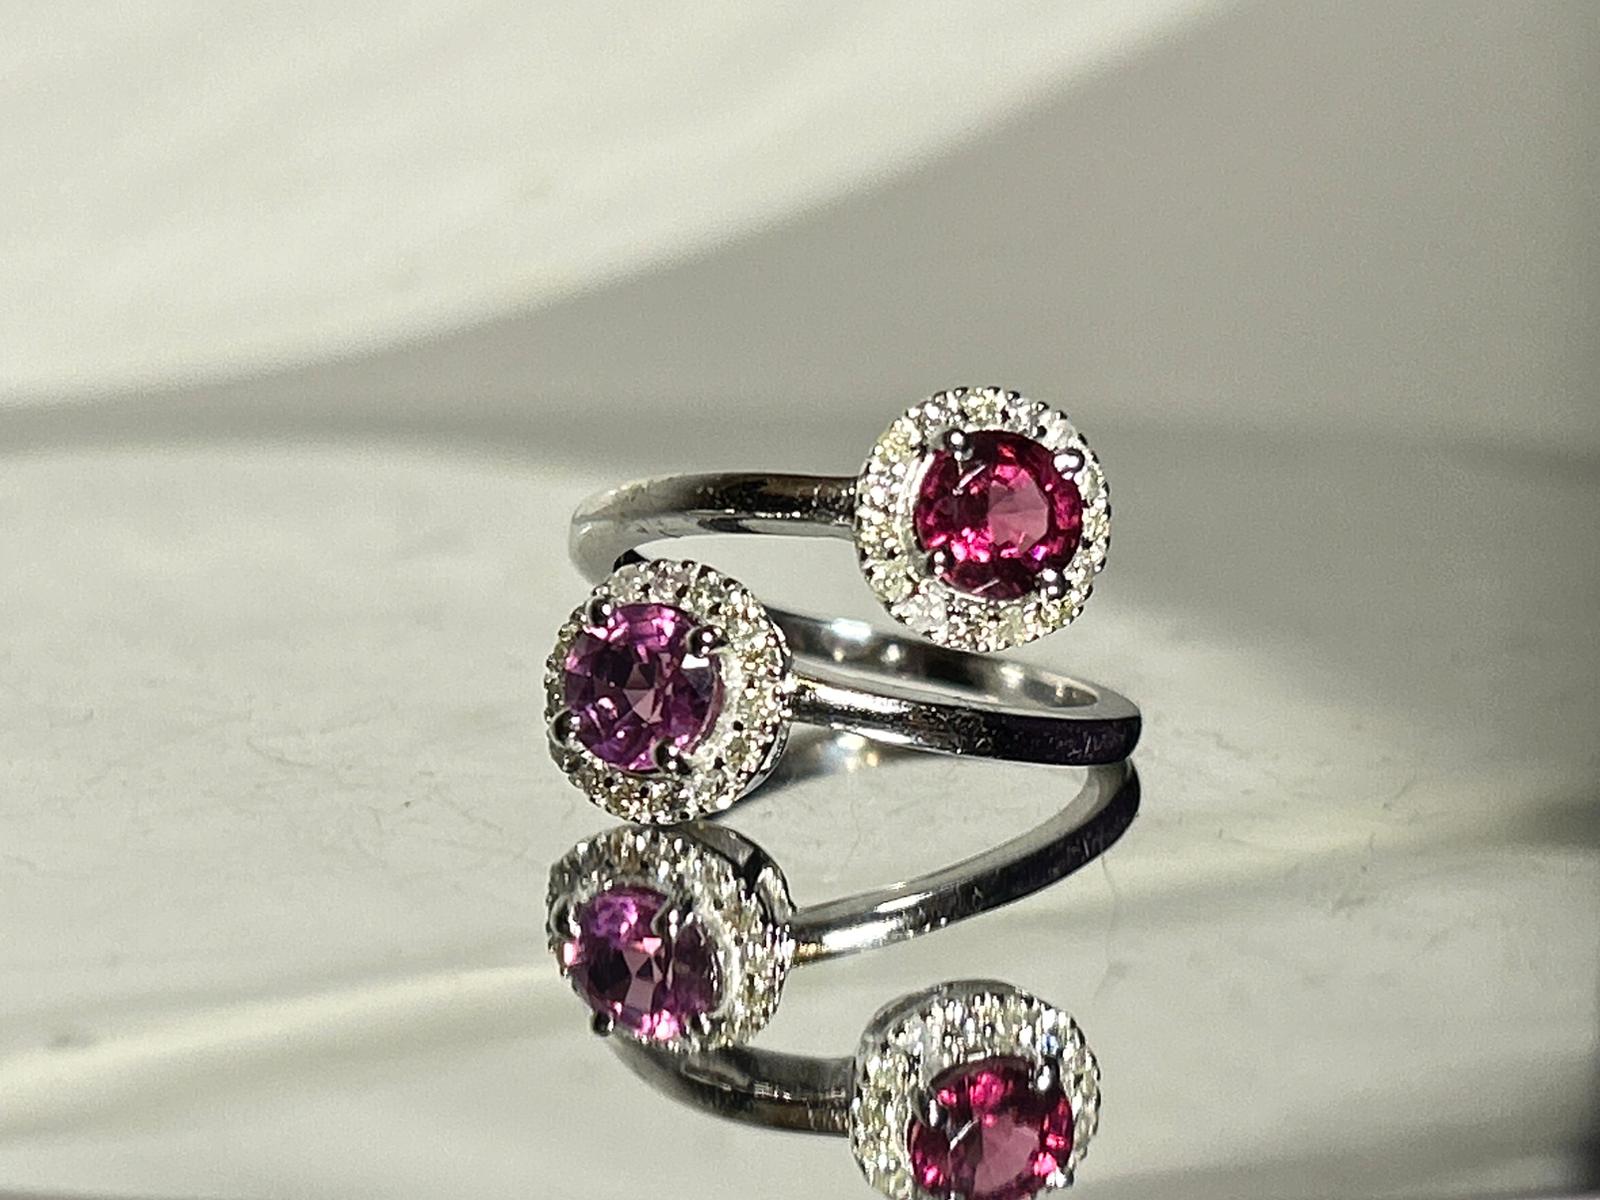 Beautiful Natural Spinel Ring With Diamonds and 18k Gold - Image 3 of 8